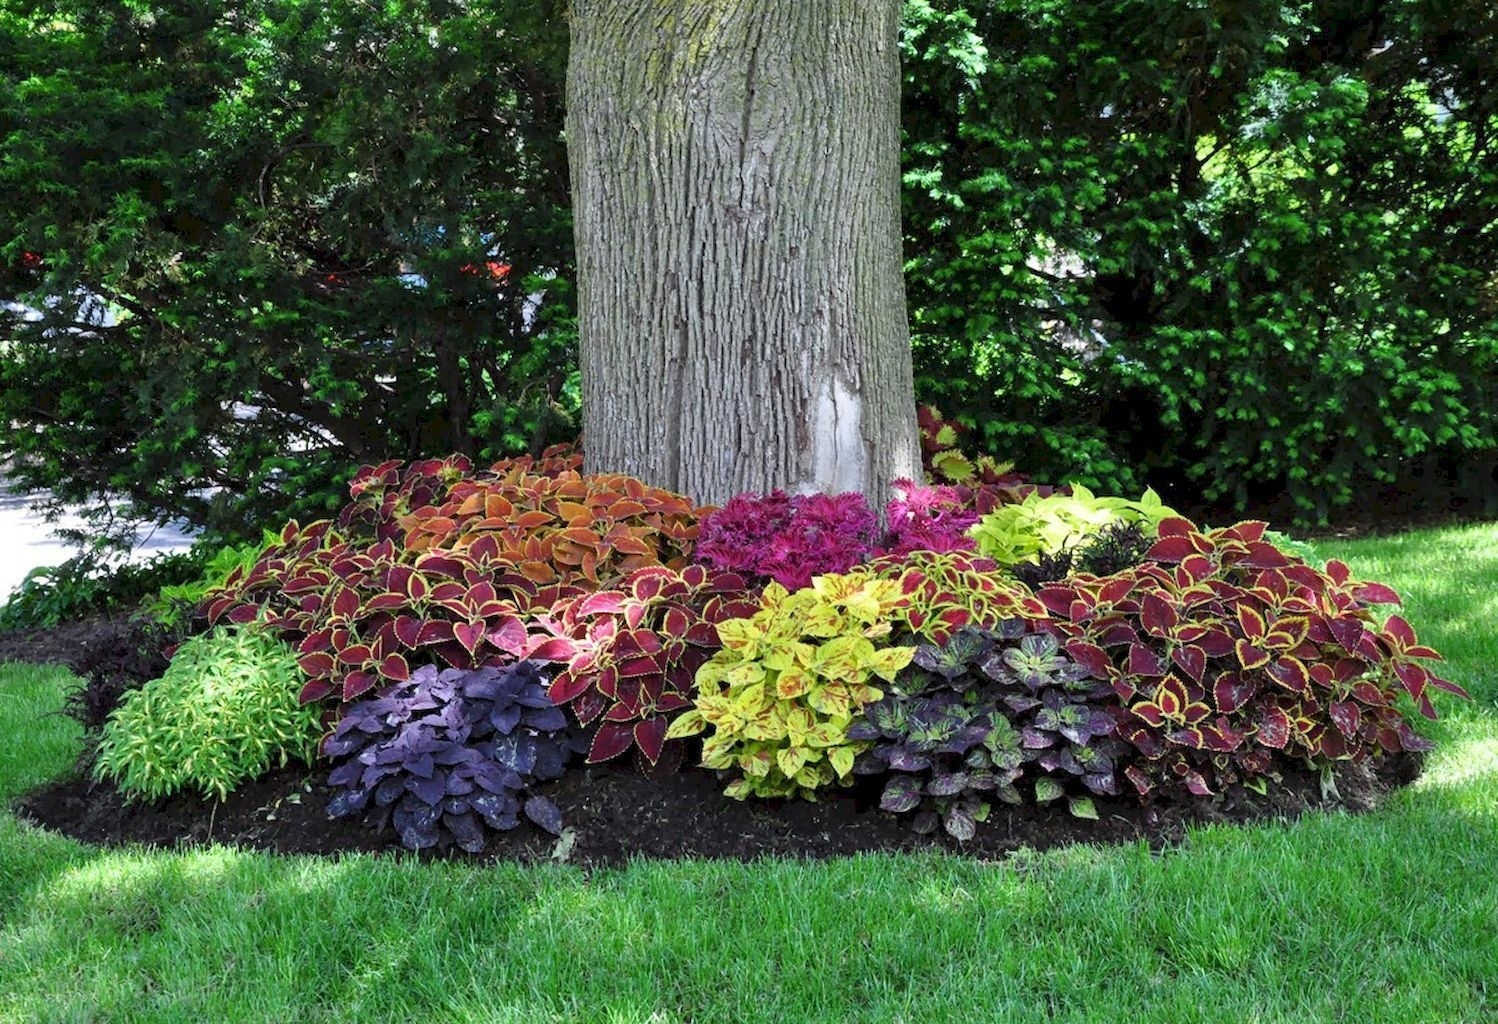 Inspiring Muscle Tree And Landscaping Photo throughout Cheap Landscaping Ideas For Your Front Yard That Will Inspire You